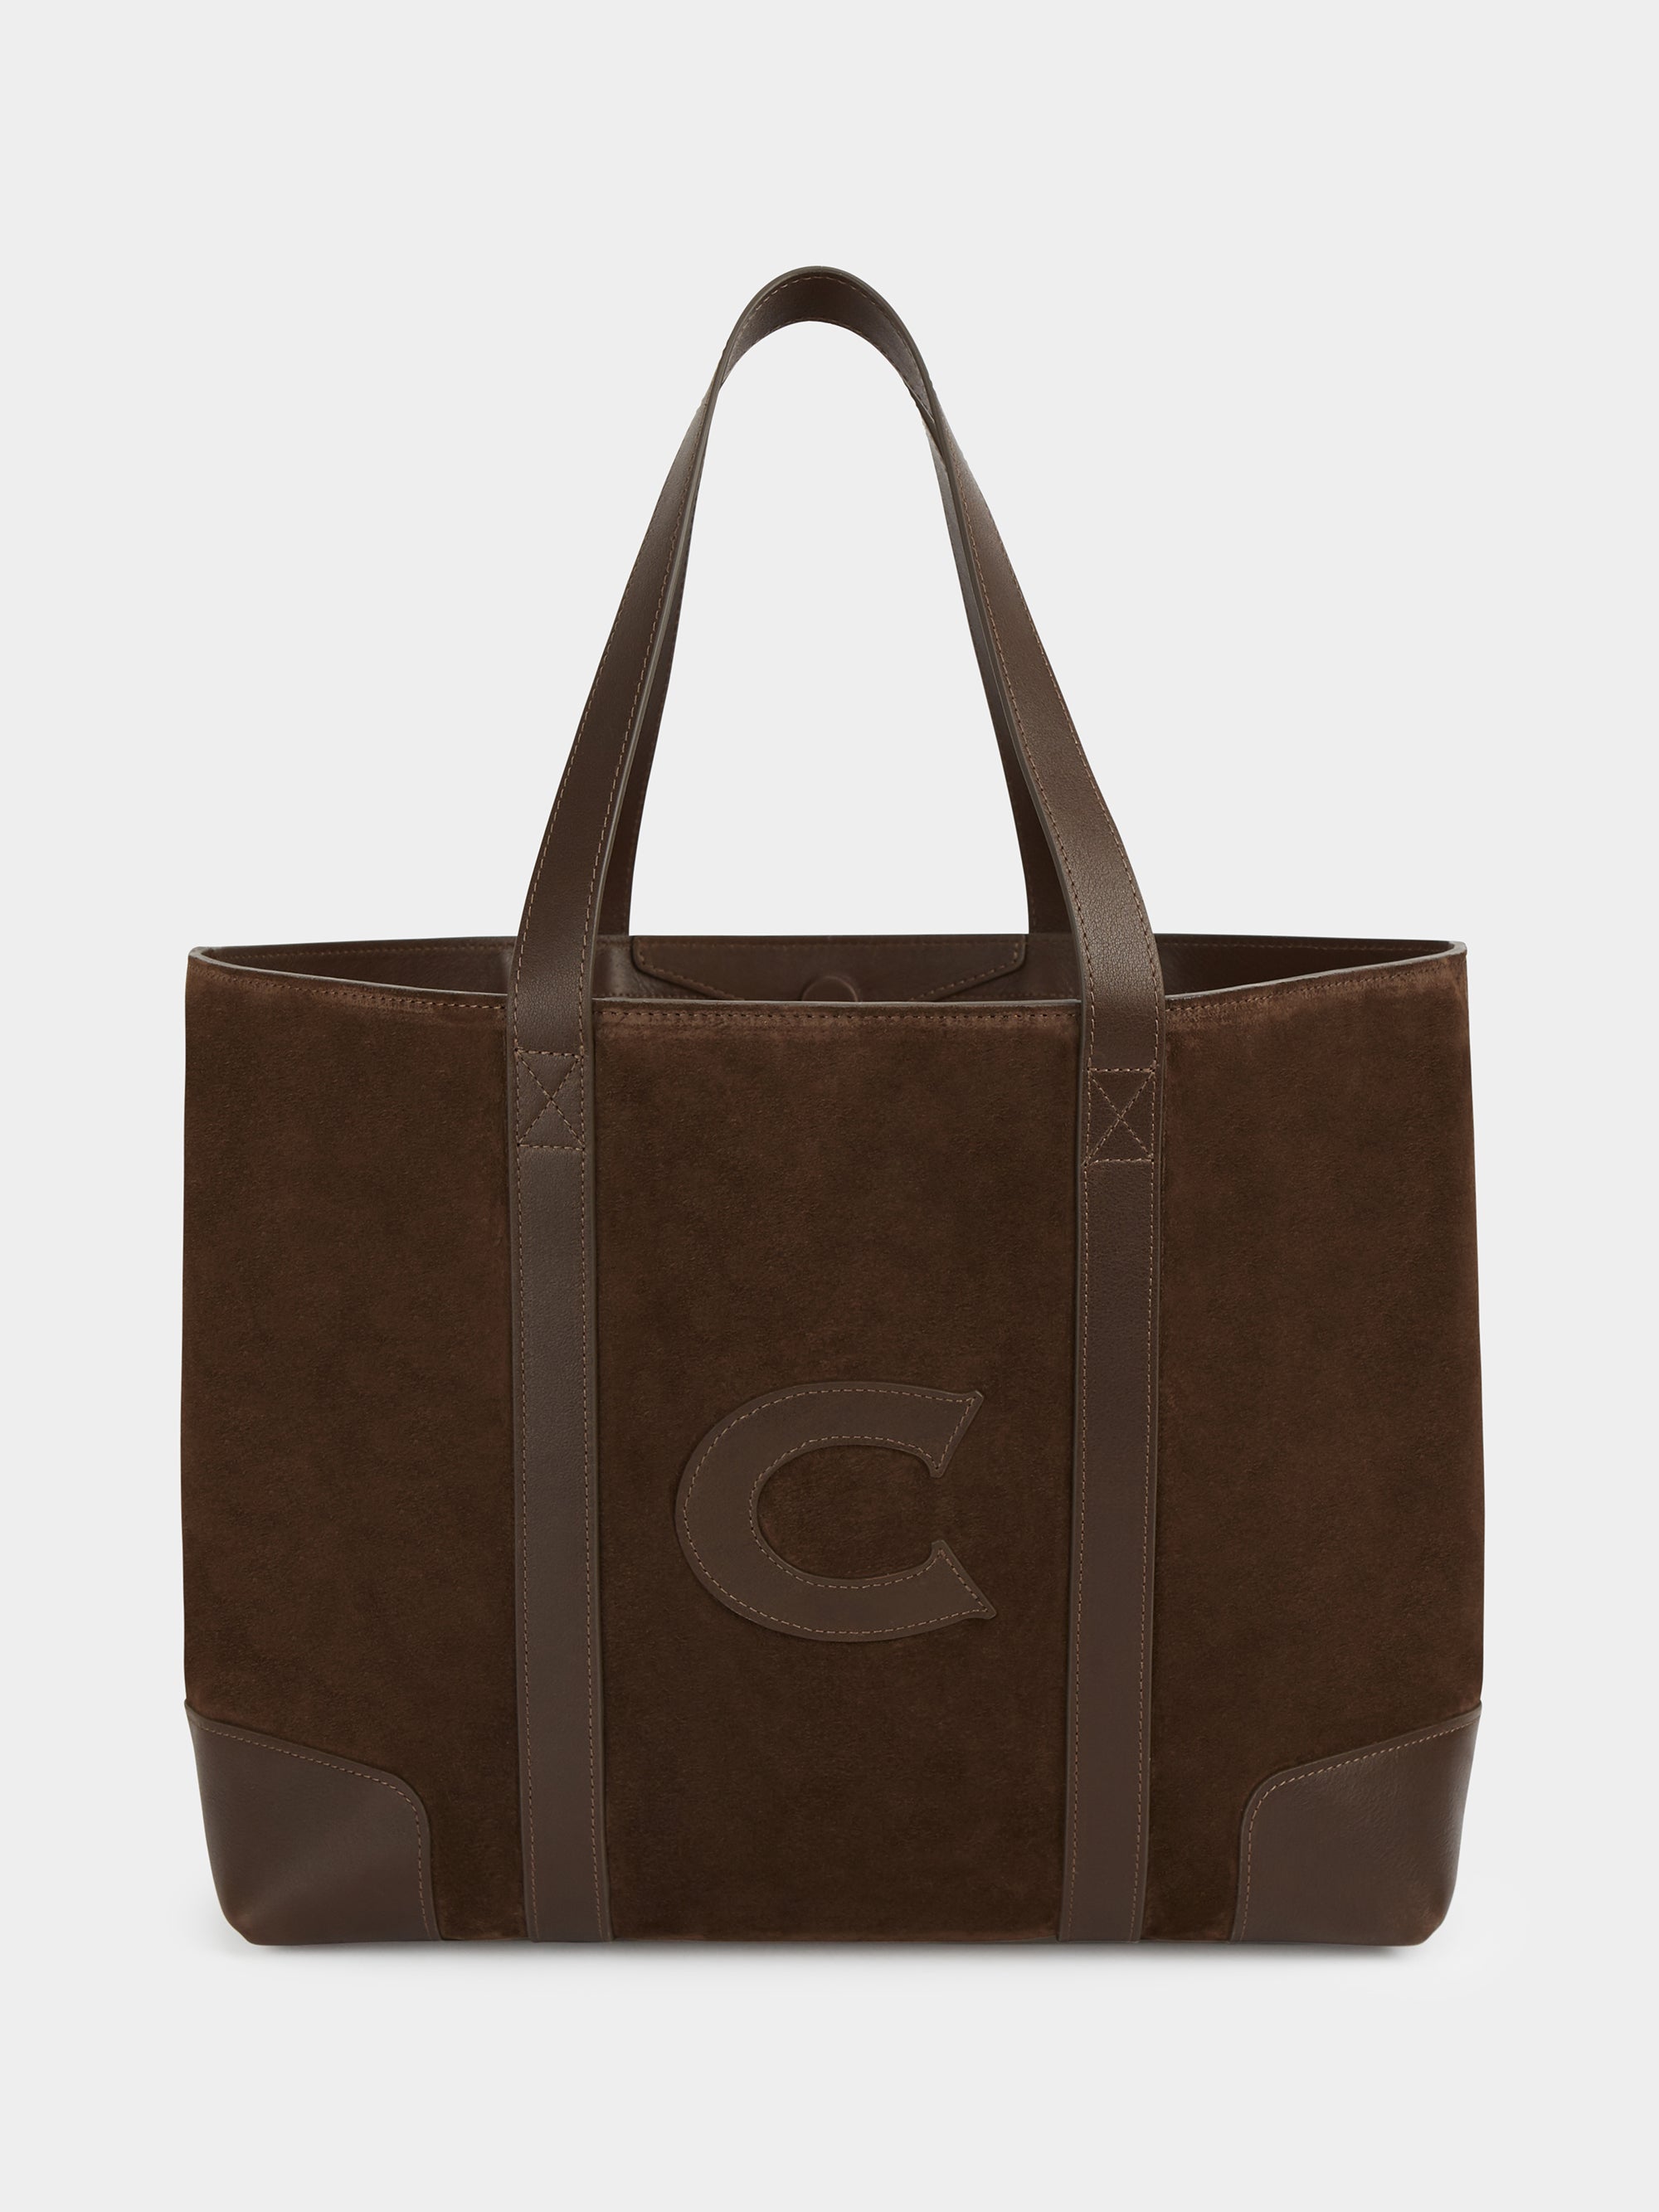 The Suede Tote Bag, Chocolate